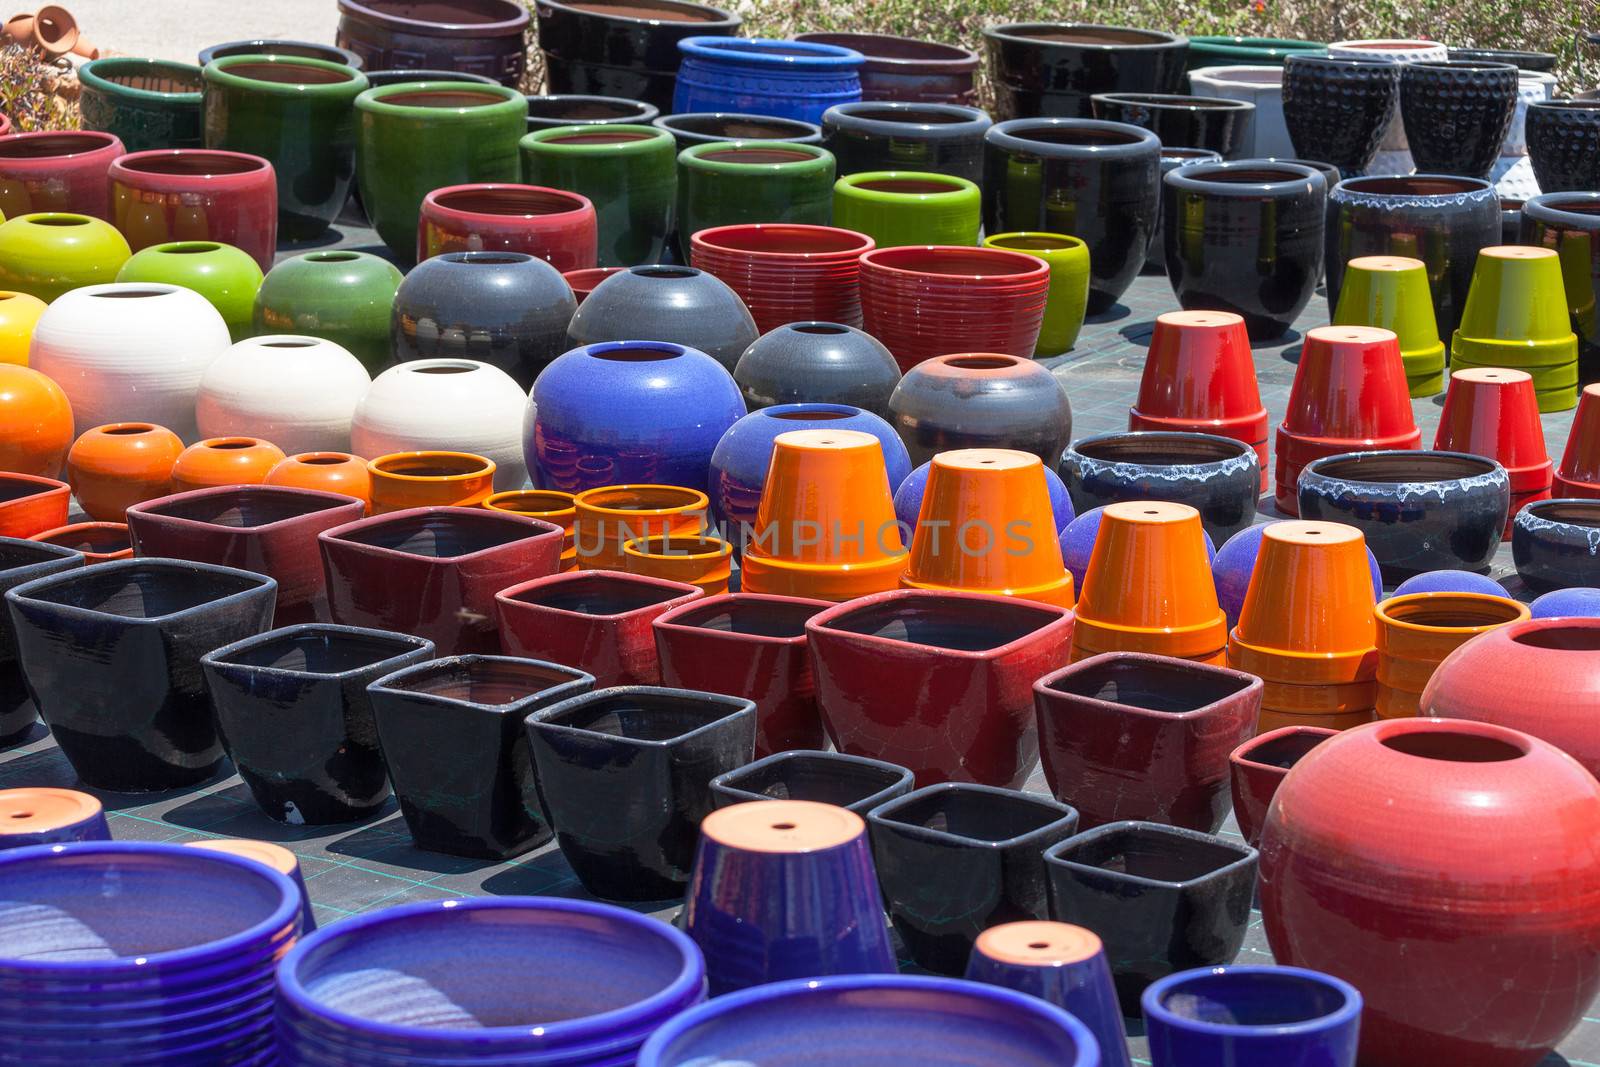 Colorful ceramic pots in market by Discovod